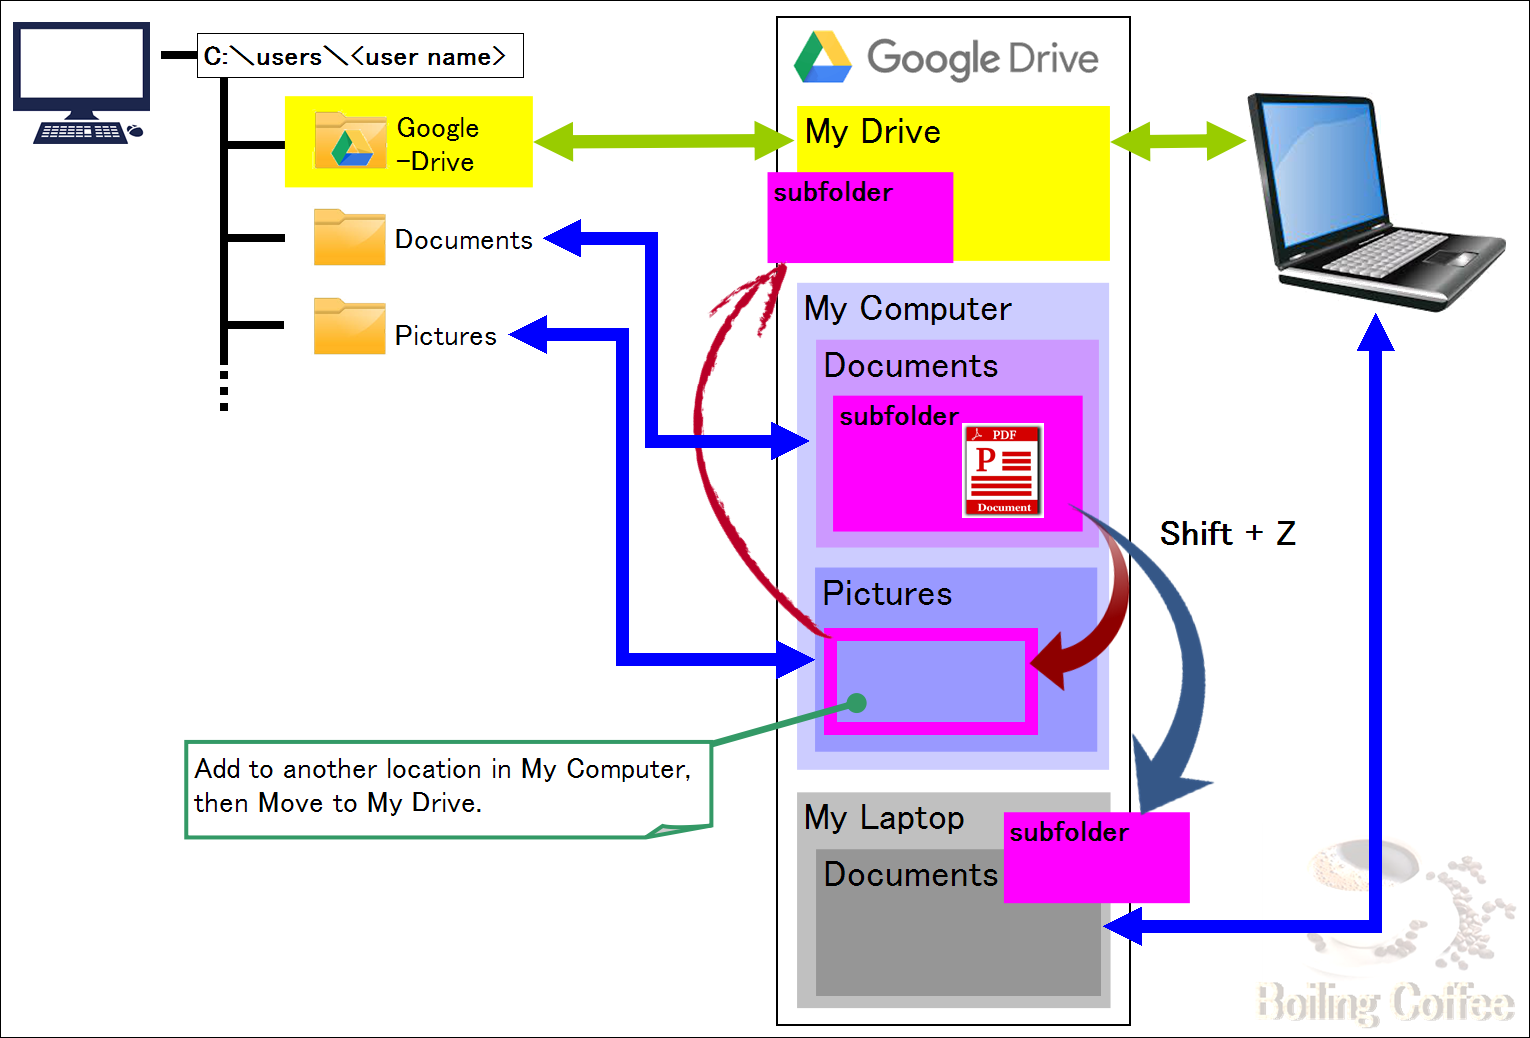 Can I sync Google Drive to two computers?